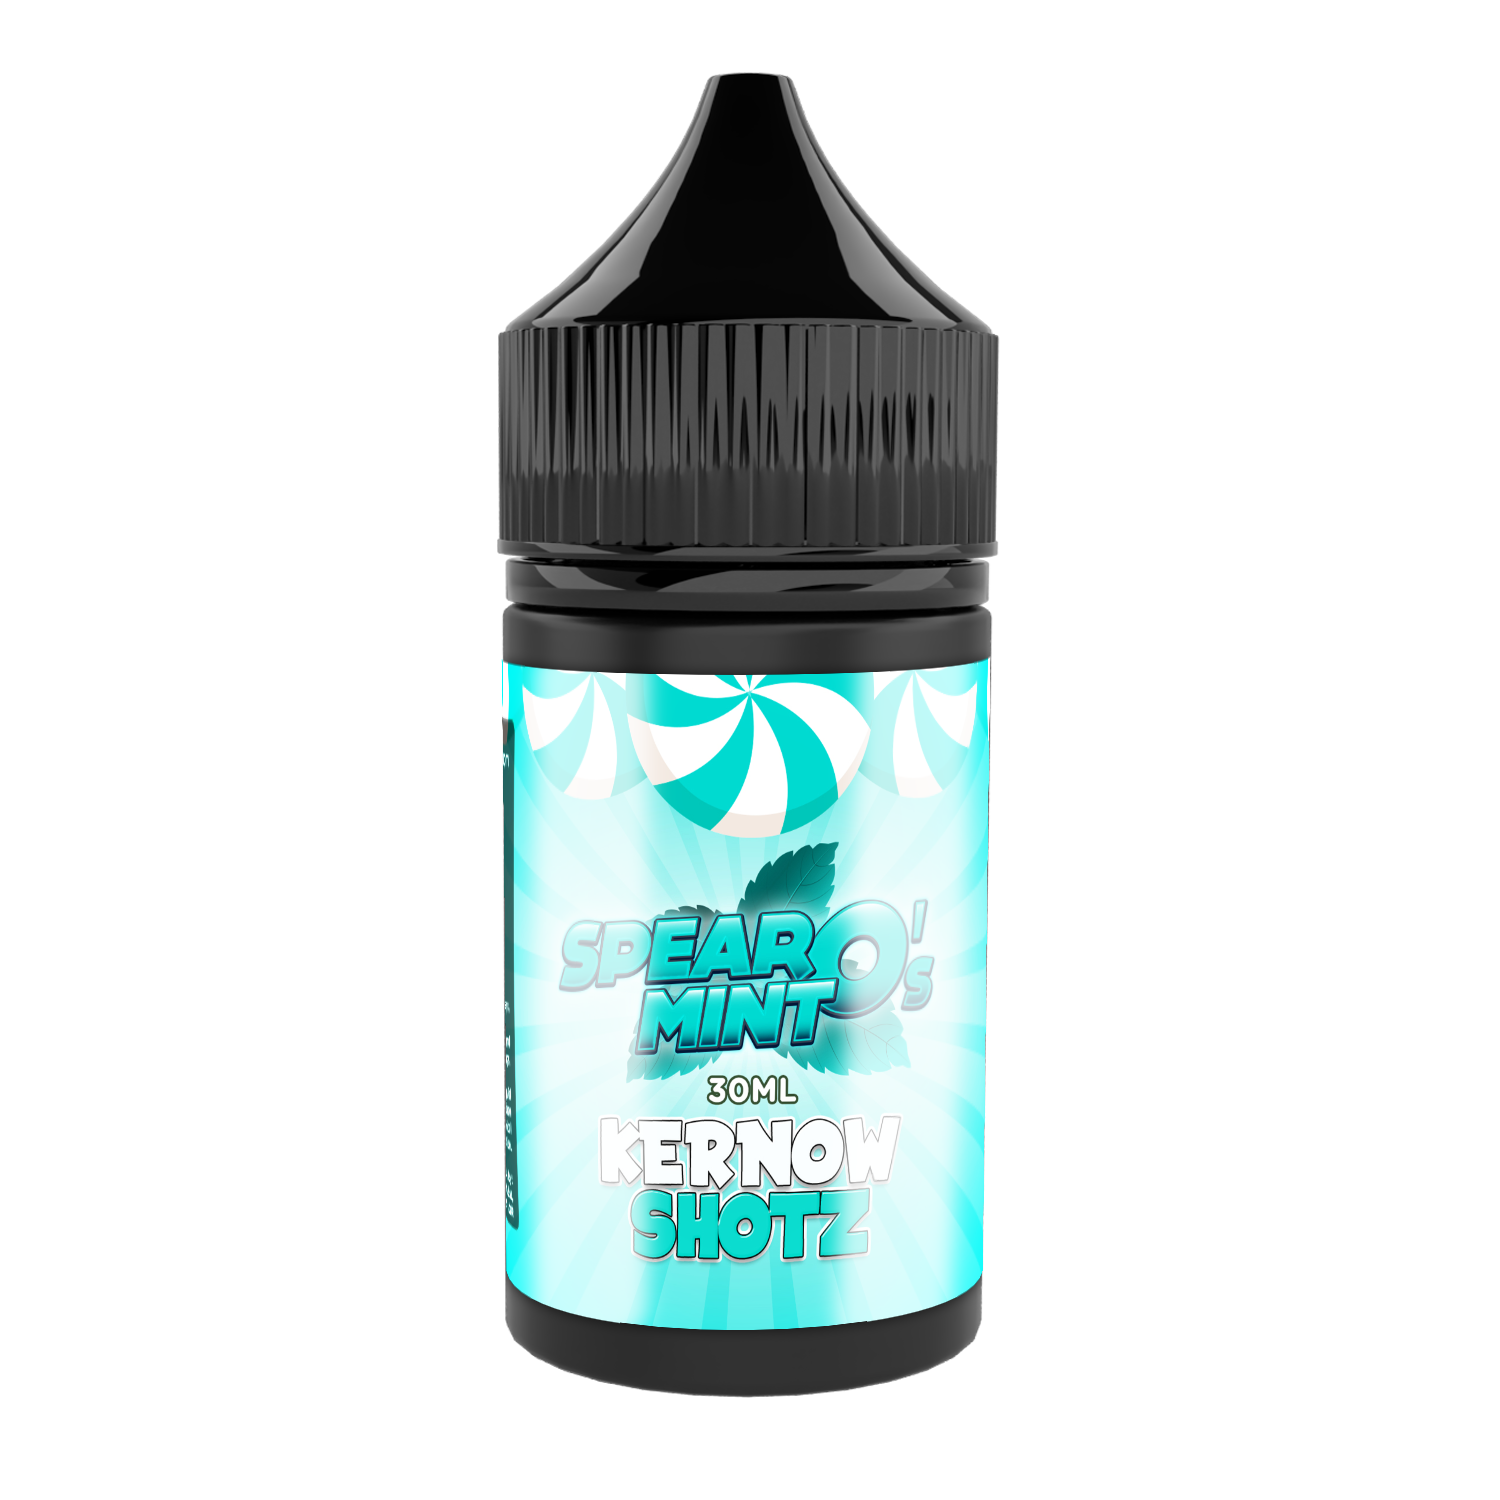 SpearMint O's Flavour Concentrate by Kernow Flavours